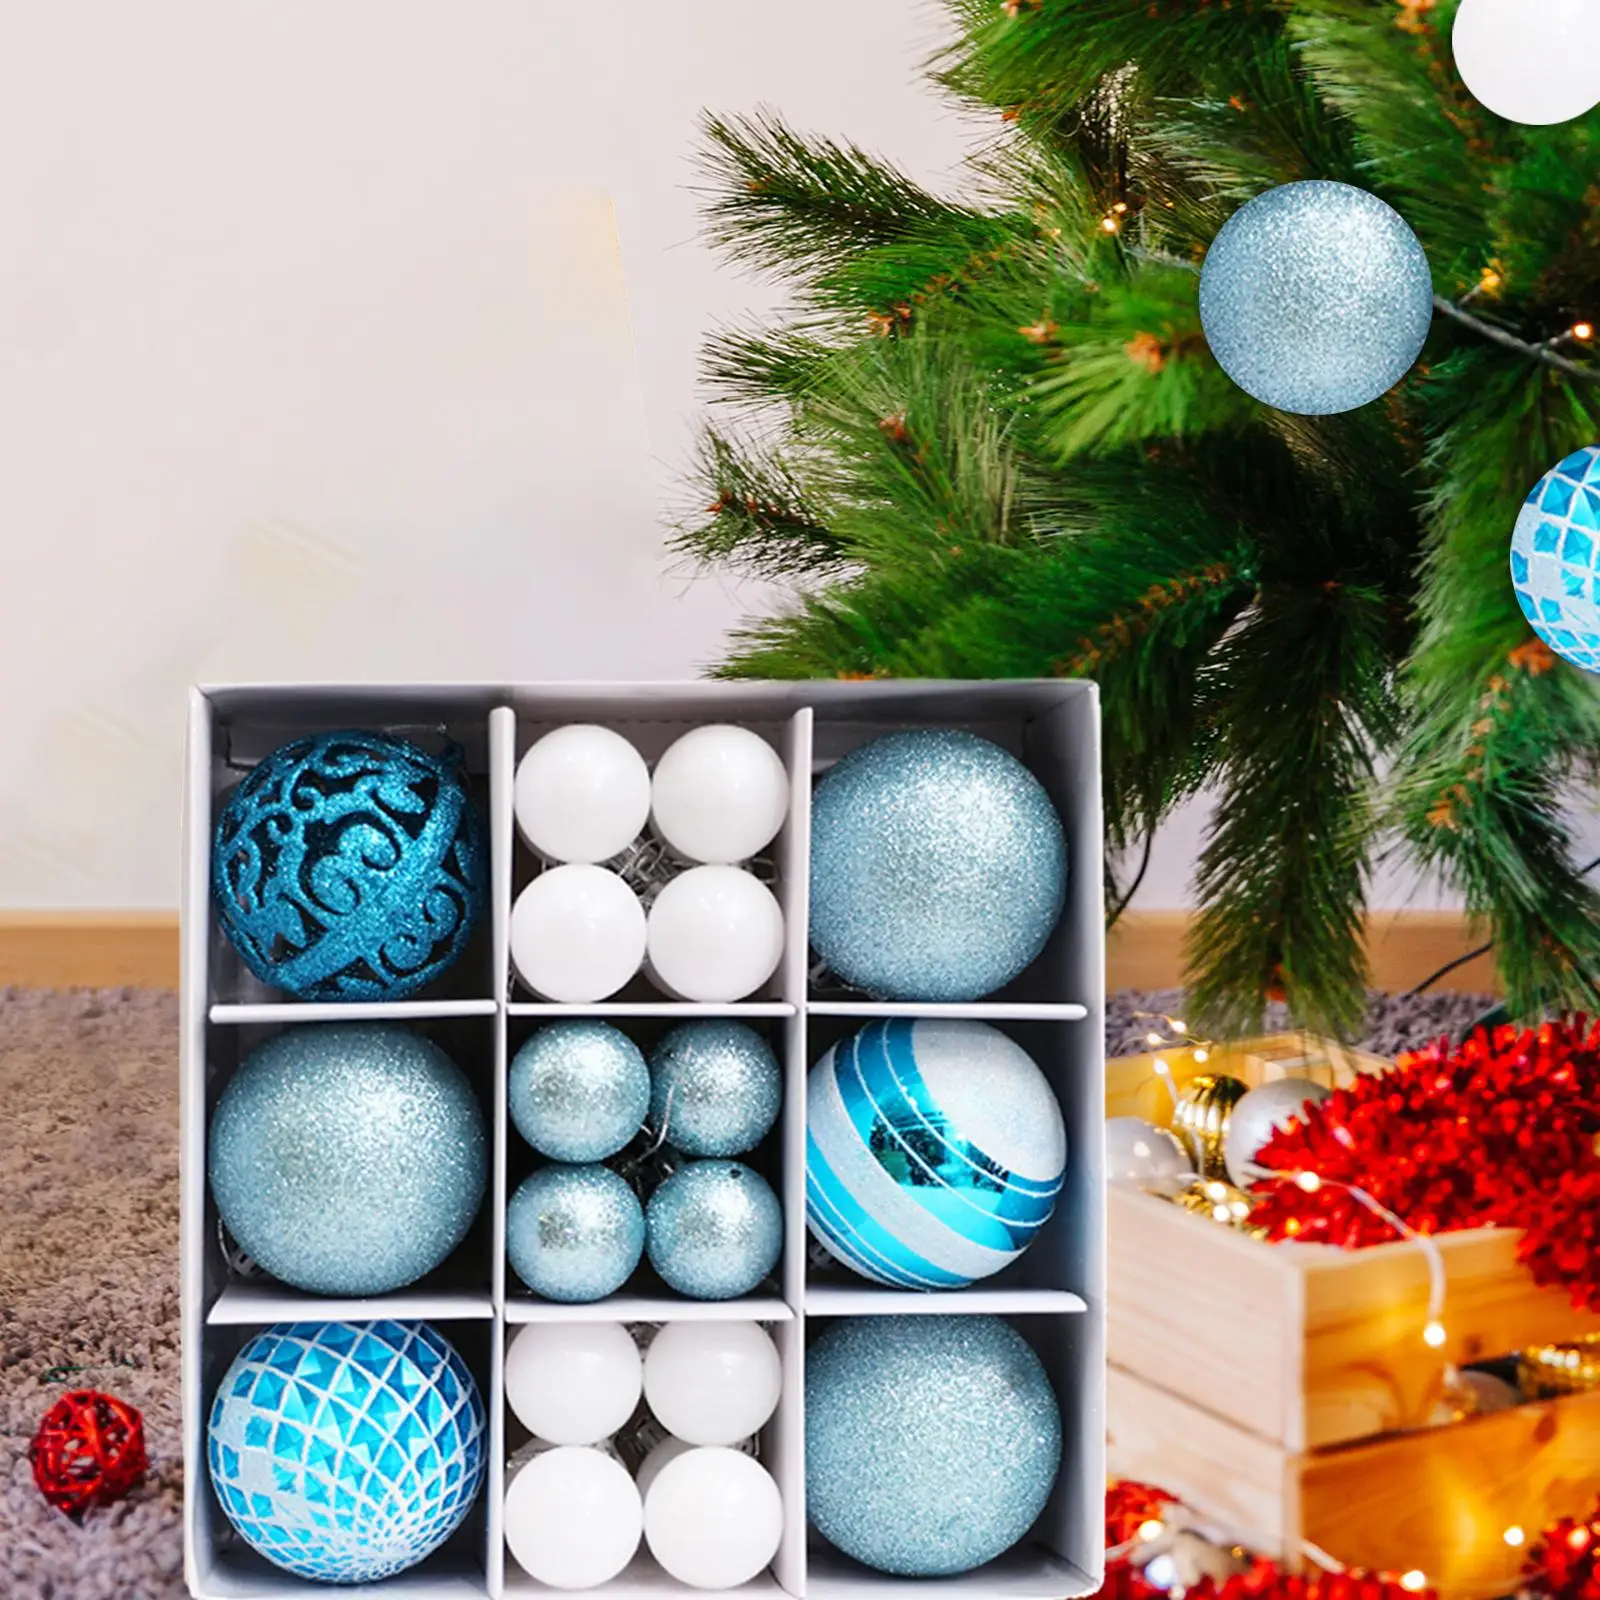 30Pcs Christmas Ball Ornaments Decorative Xmas Balls Baubles Christmas Tree Decorations for New Year Indoor Wreath Party Home